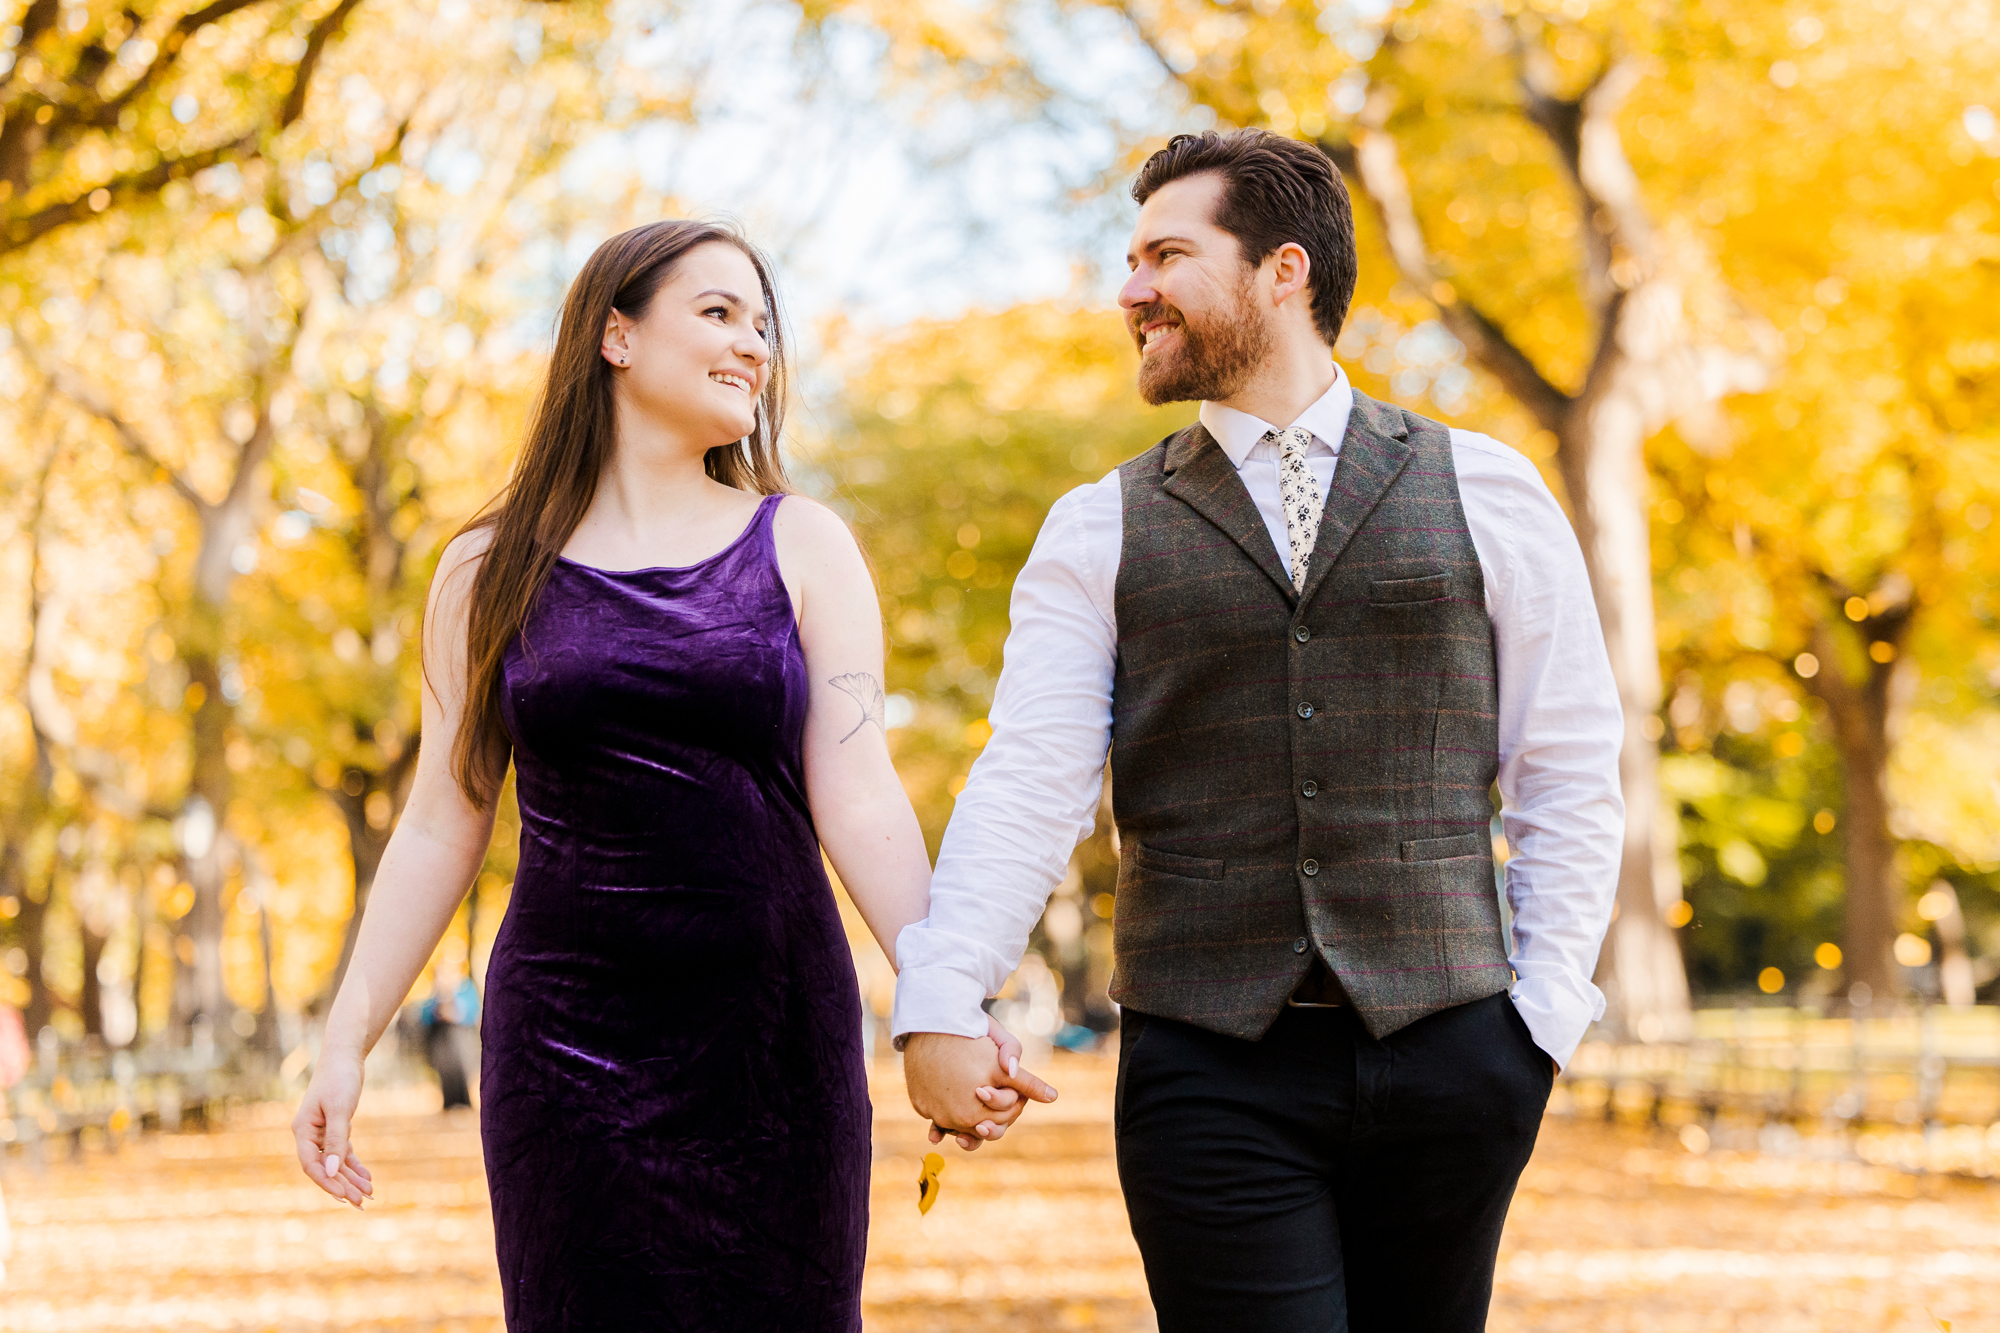 Flawless Central Park Engagement Photography Session